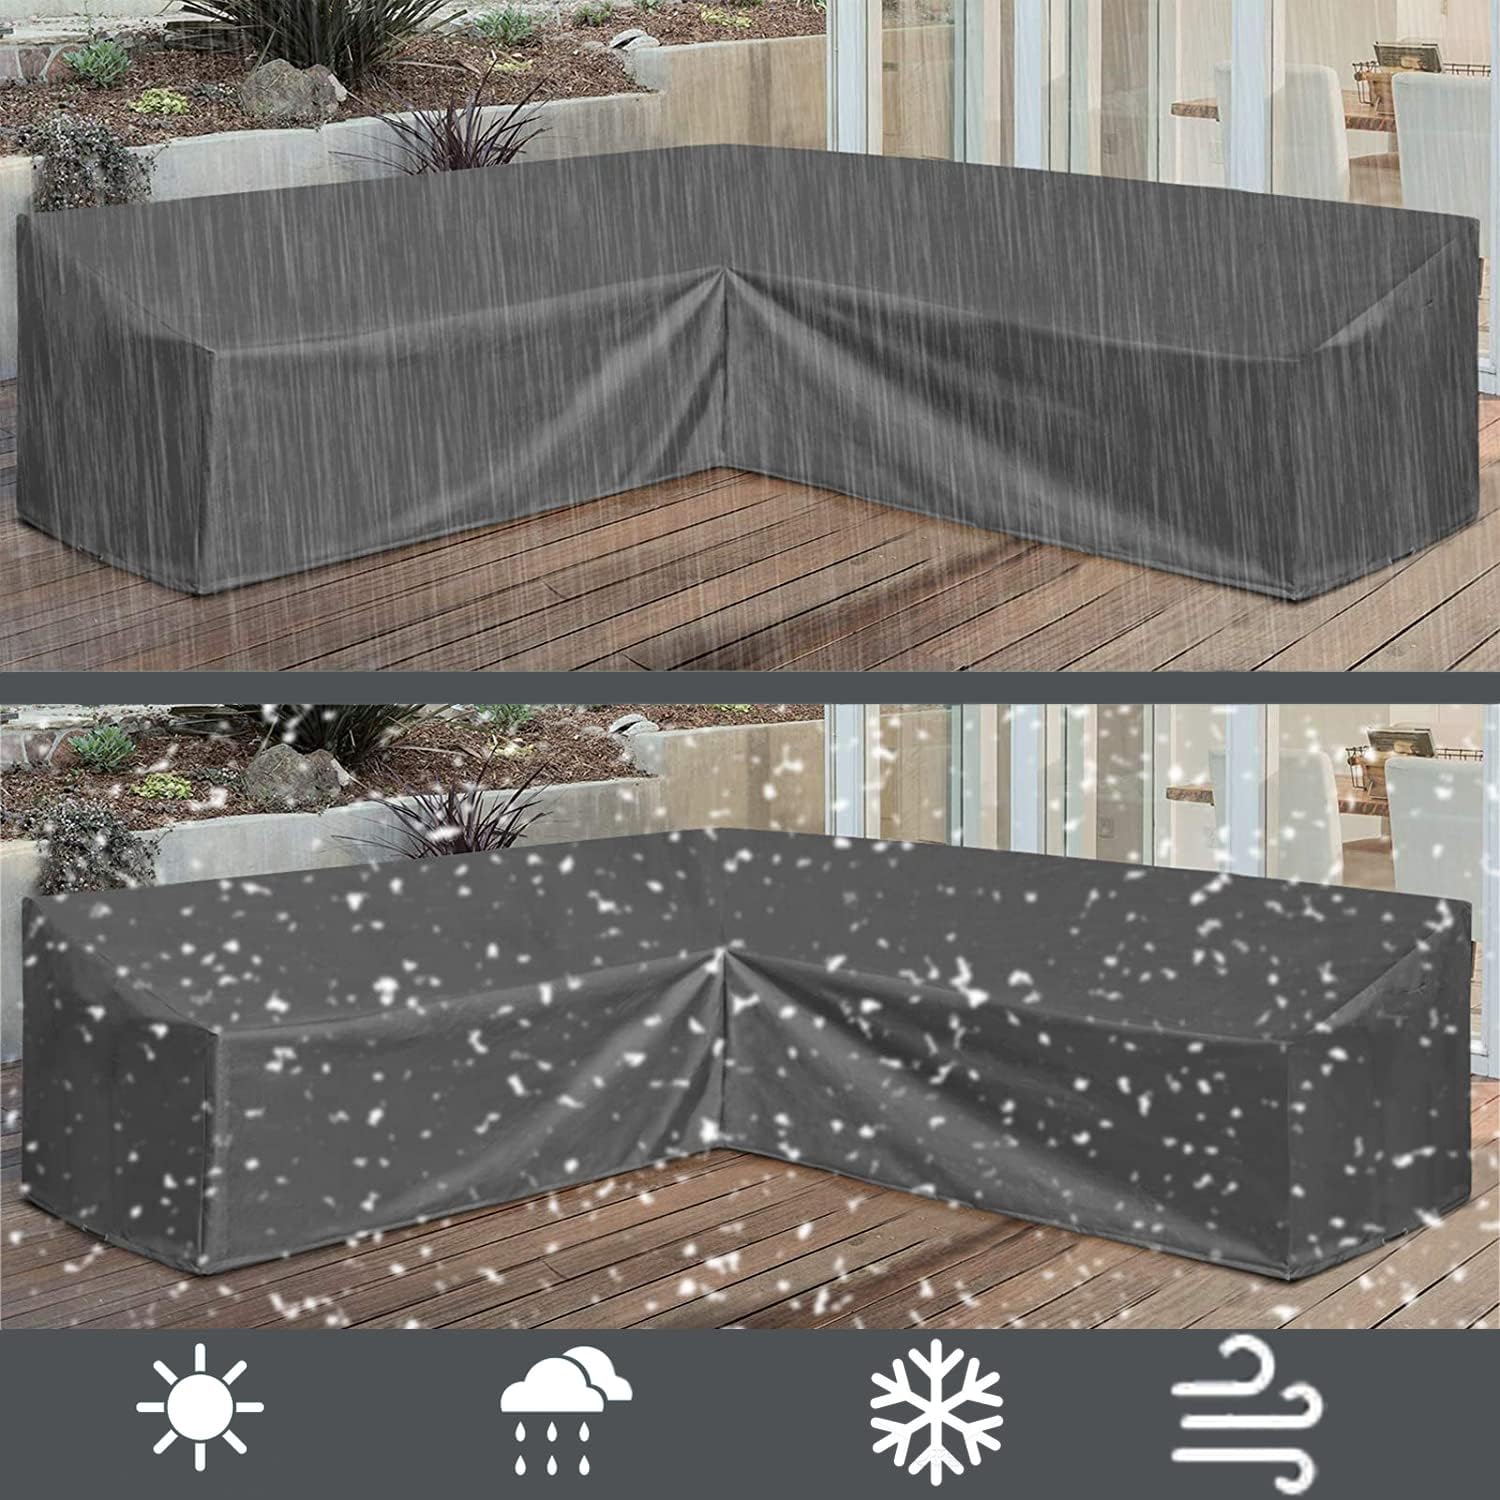 Orgrul V-Shape Garden Furniture Cover Waterproof,Windproof,outdoor Rattan Corner Sofa Cover with Waterproof Tape,heavy duty Oxford Fabric L Shaped Patio Sofa Cover Dustproof Anti-UV(255*255cm)-Grey